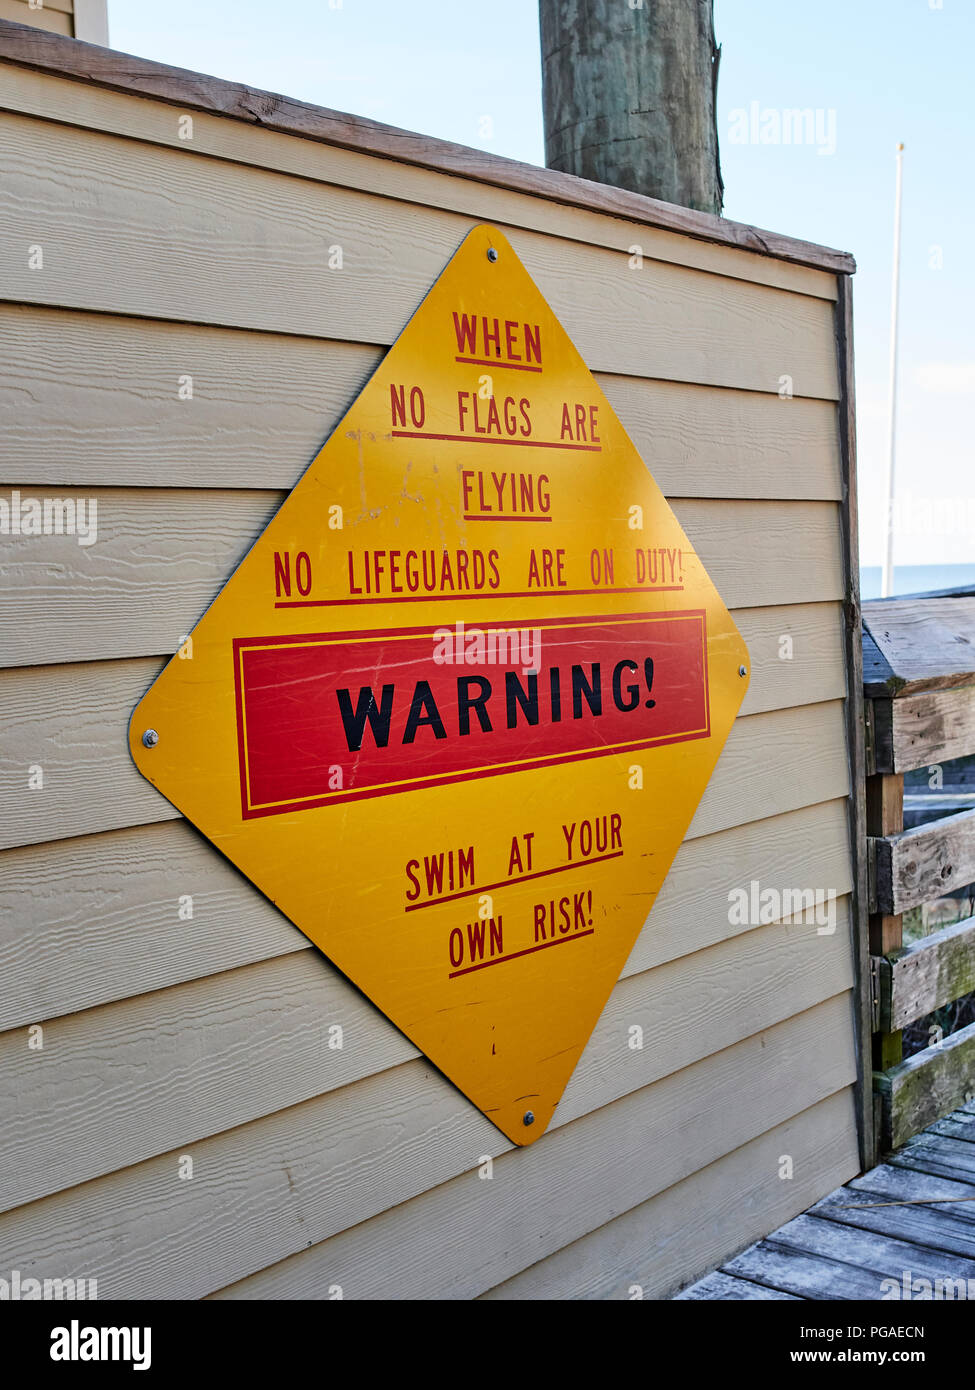 Ocean beach warning sign stating no lifeguard is on duty and to swim at your own risk when no flags are flying in Destin Florida, USA. Stock Photo